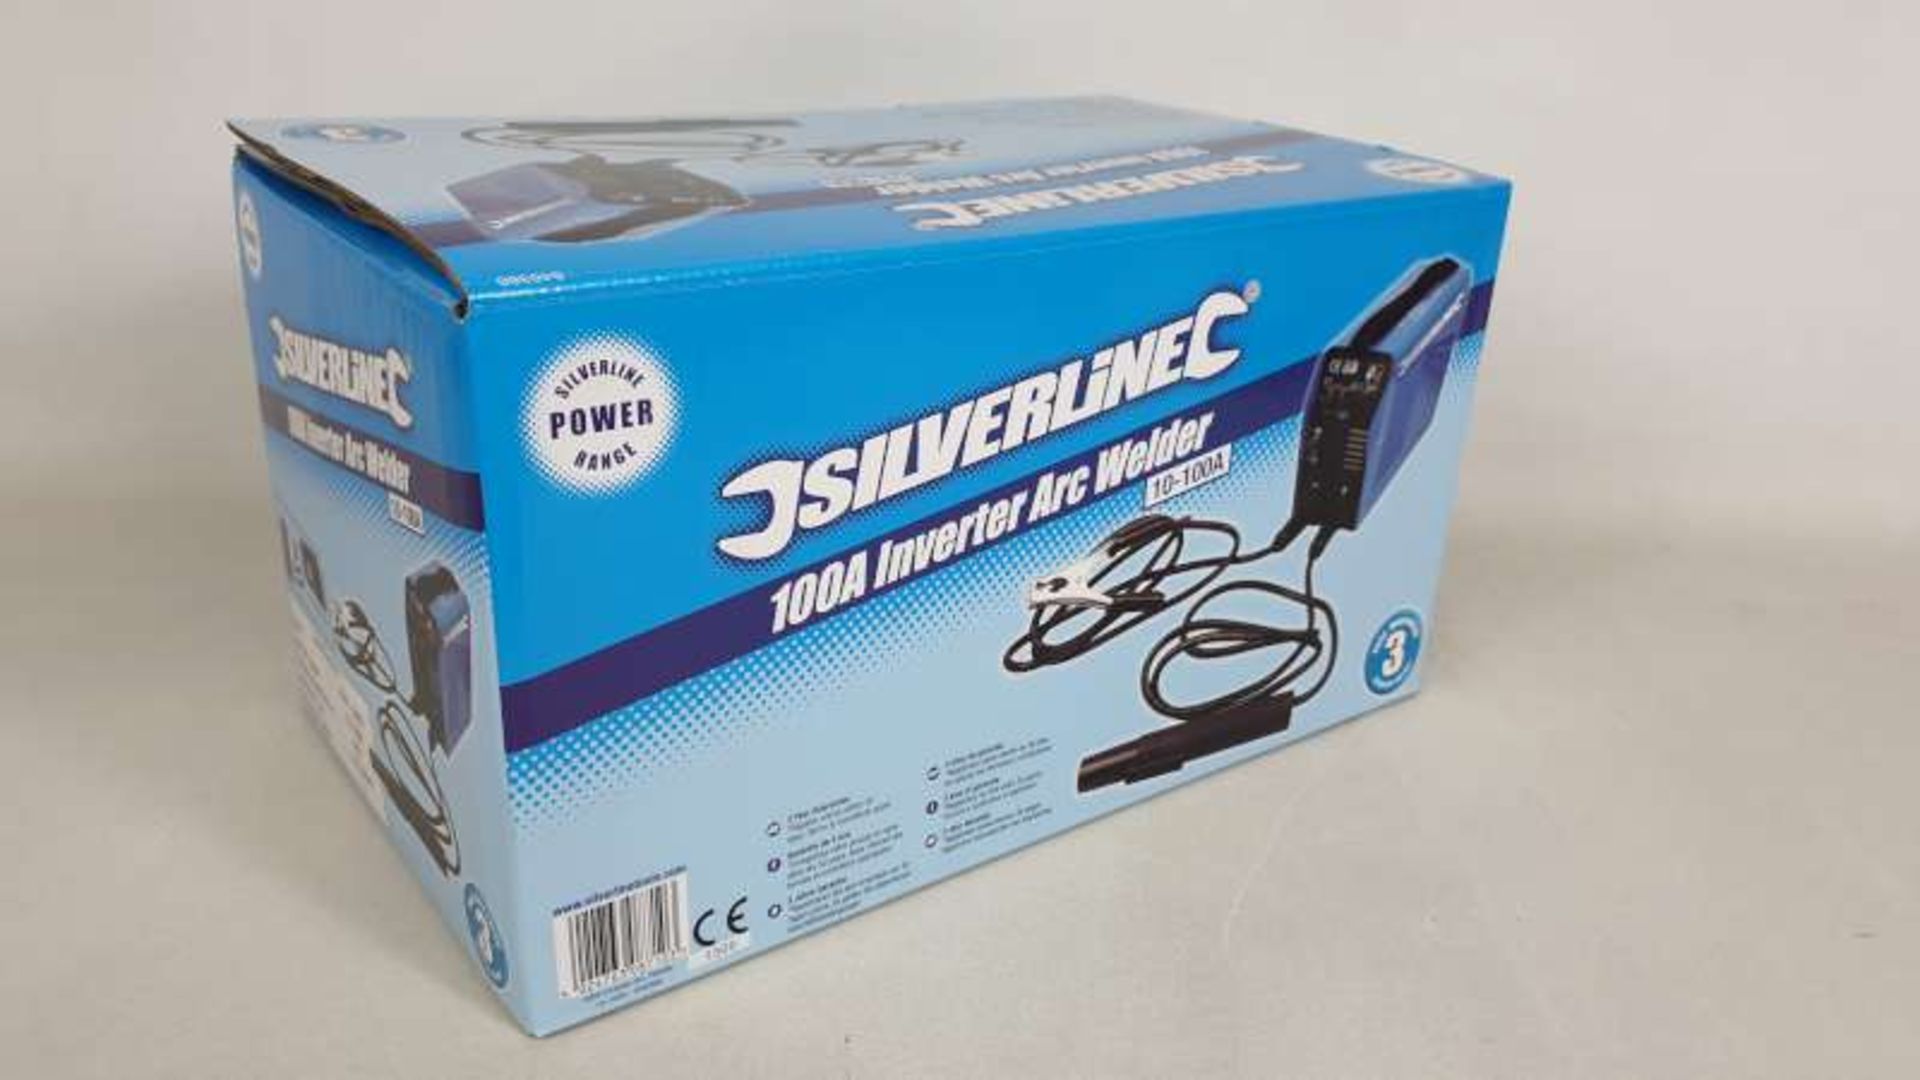 BRAND NEW BOXED SILVERLINE 100A INVERTER ARC WELDER WITH 3 YEARS MANUFACTURERS GUARANTEE